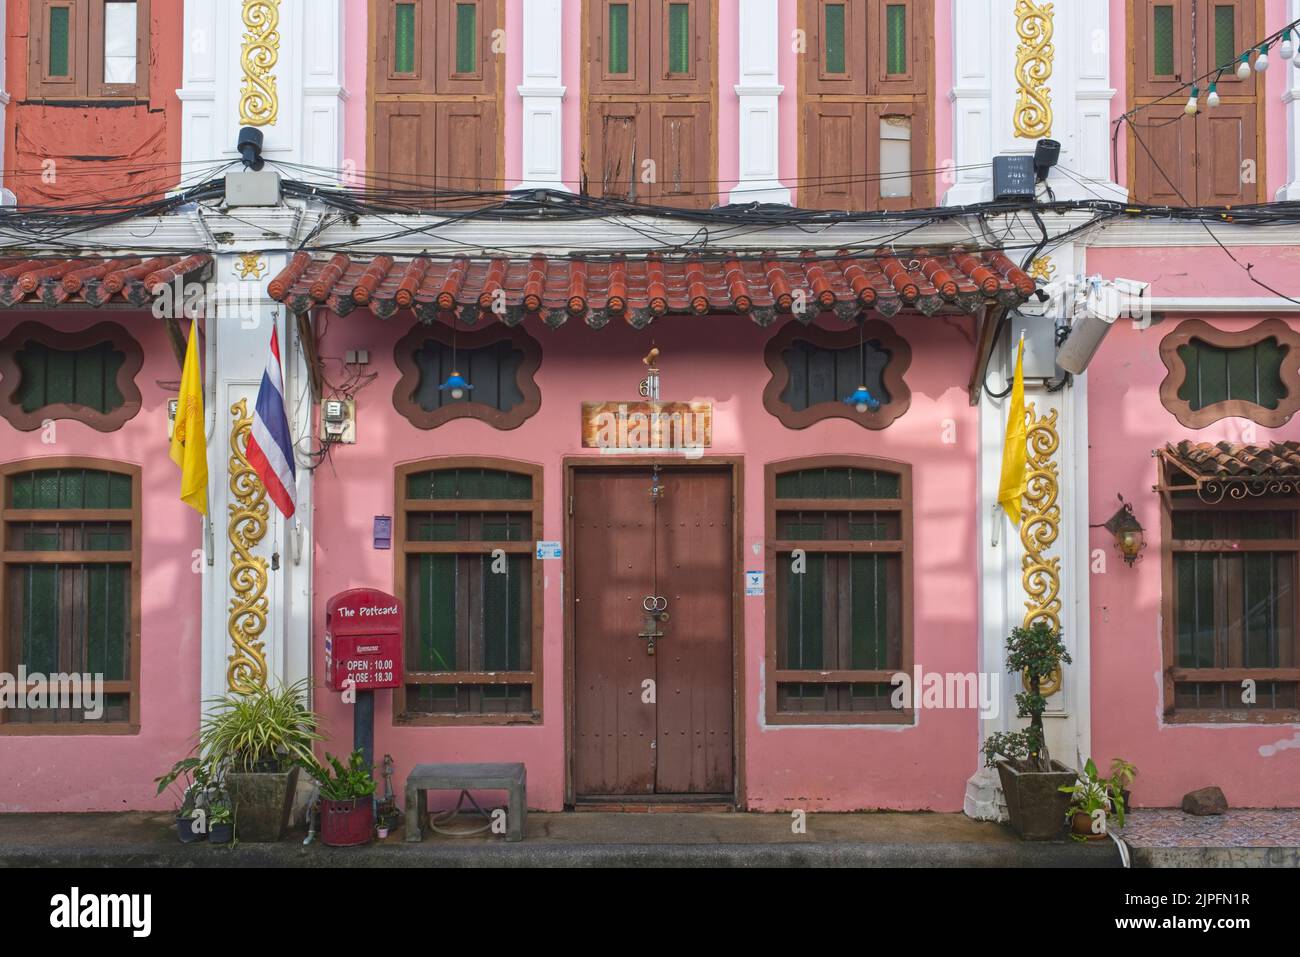 Traditional Sino-Portuguese (Peranakan) shophouses in Soi Rommanee (Romanni / Romanee) in the Old Town (Chinatown) area of Phuket Town, Thailand Stock Photo